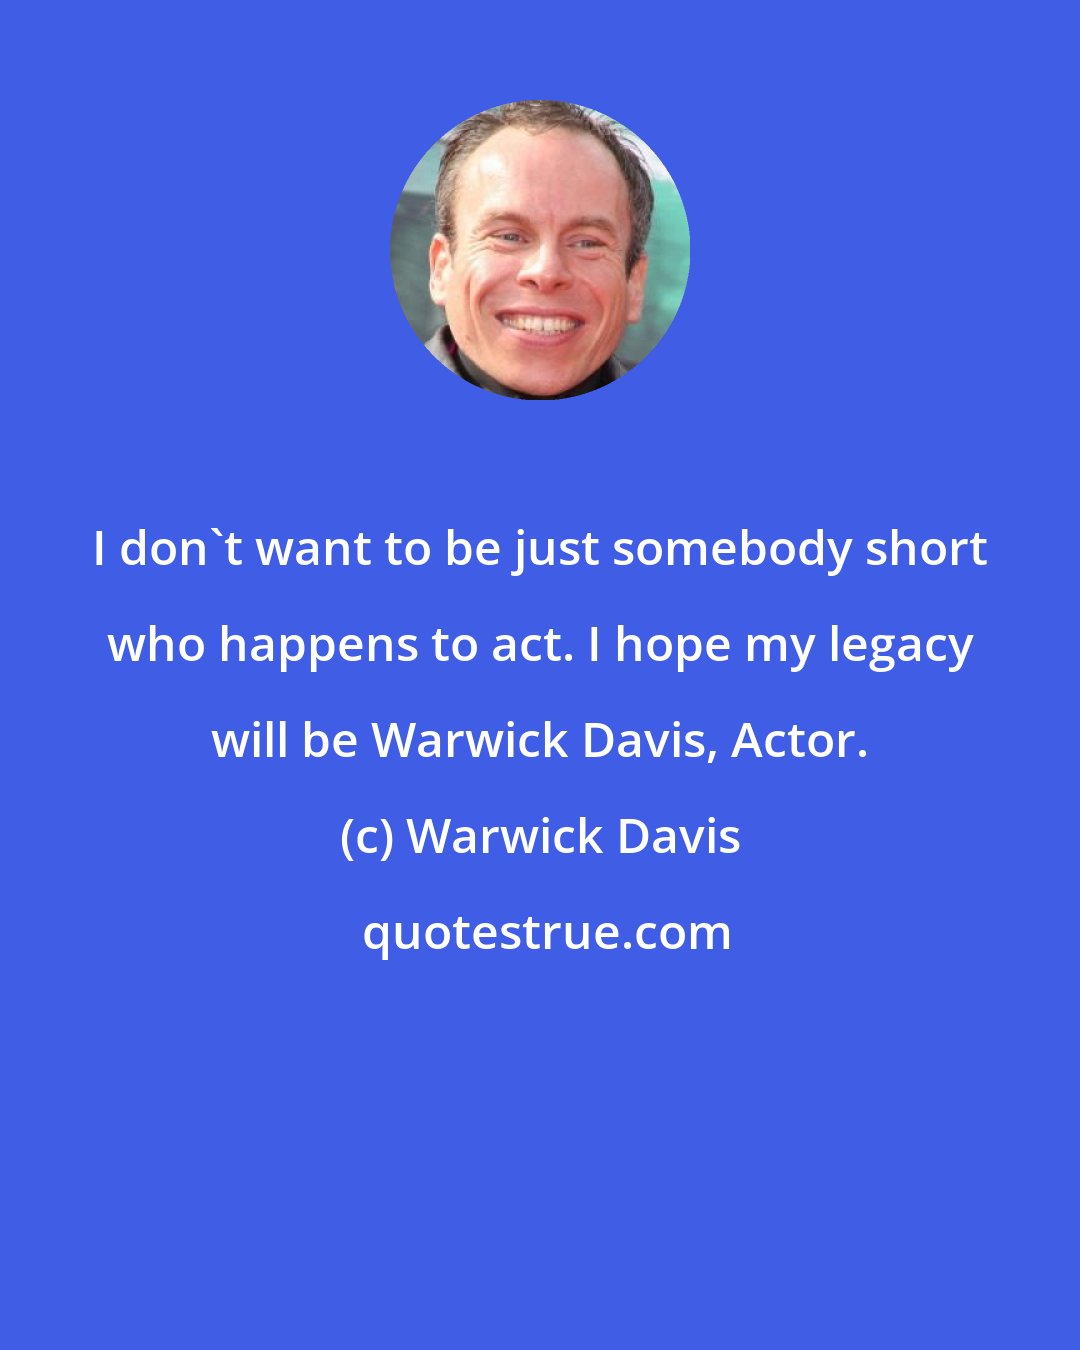 Warwick Davis: I don't want to be just somebody short who happens to act. I hope my legacy will be Warwick Davis, Actor.